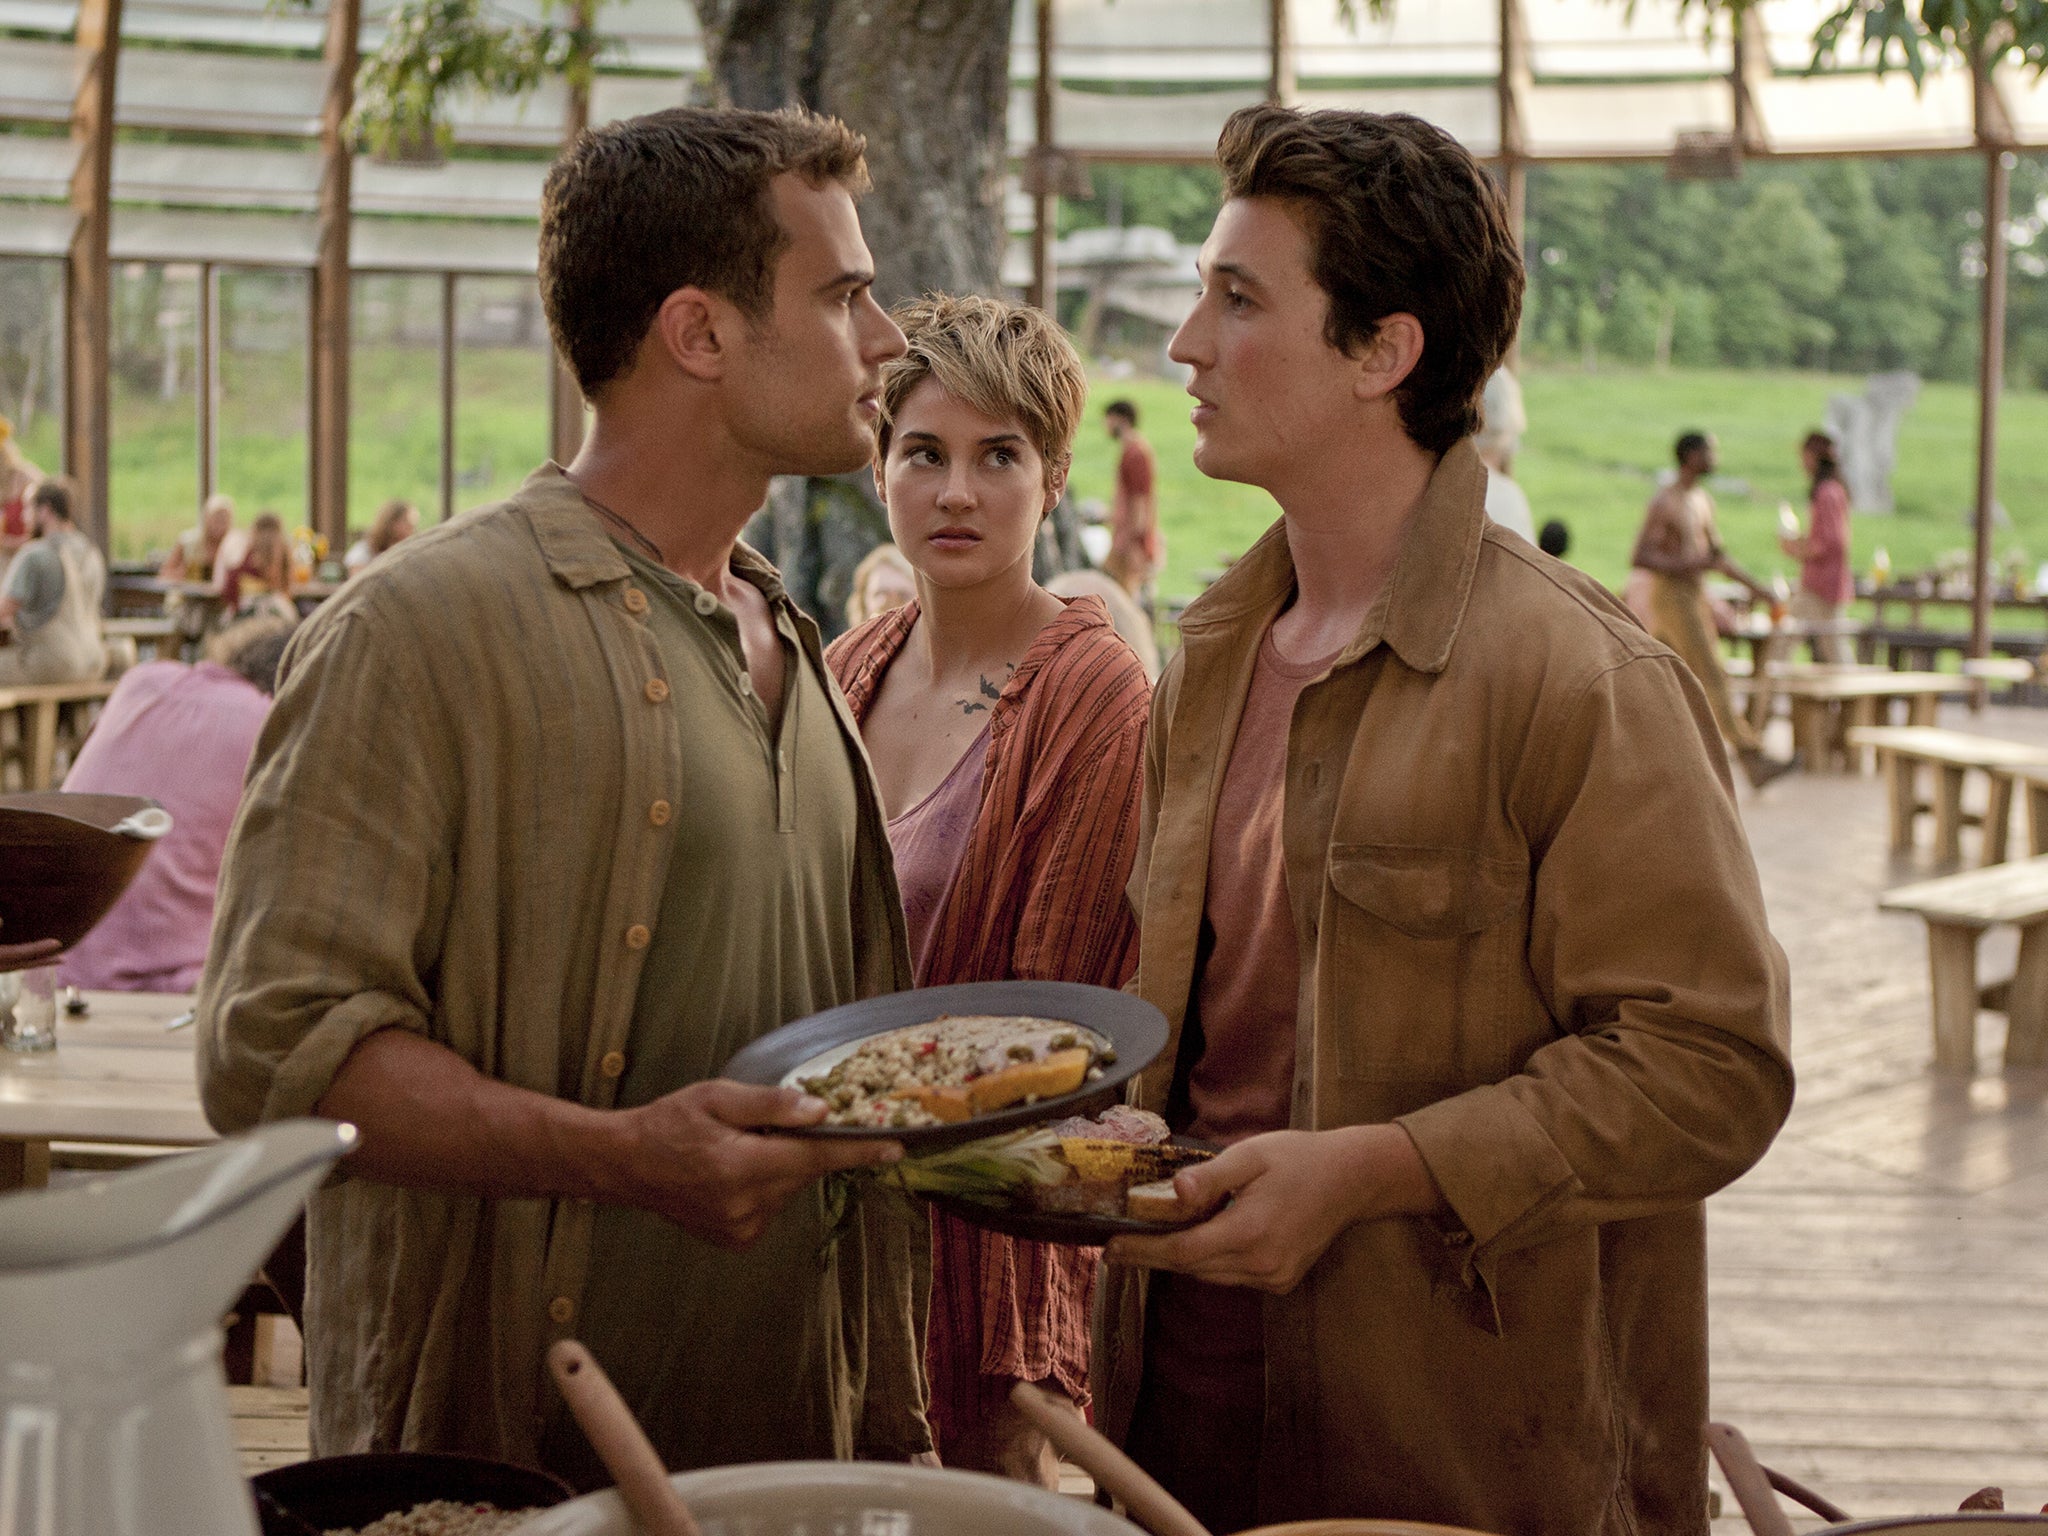 More than just an in-betweener: Theo James, Shailene Woodley and Miles Teller in ‘Insurgent’